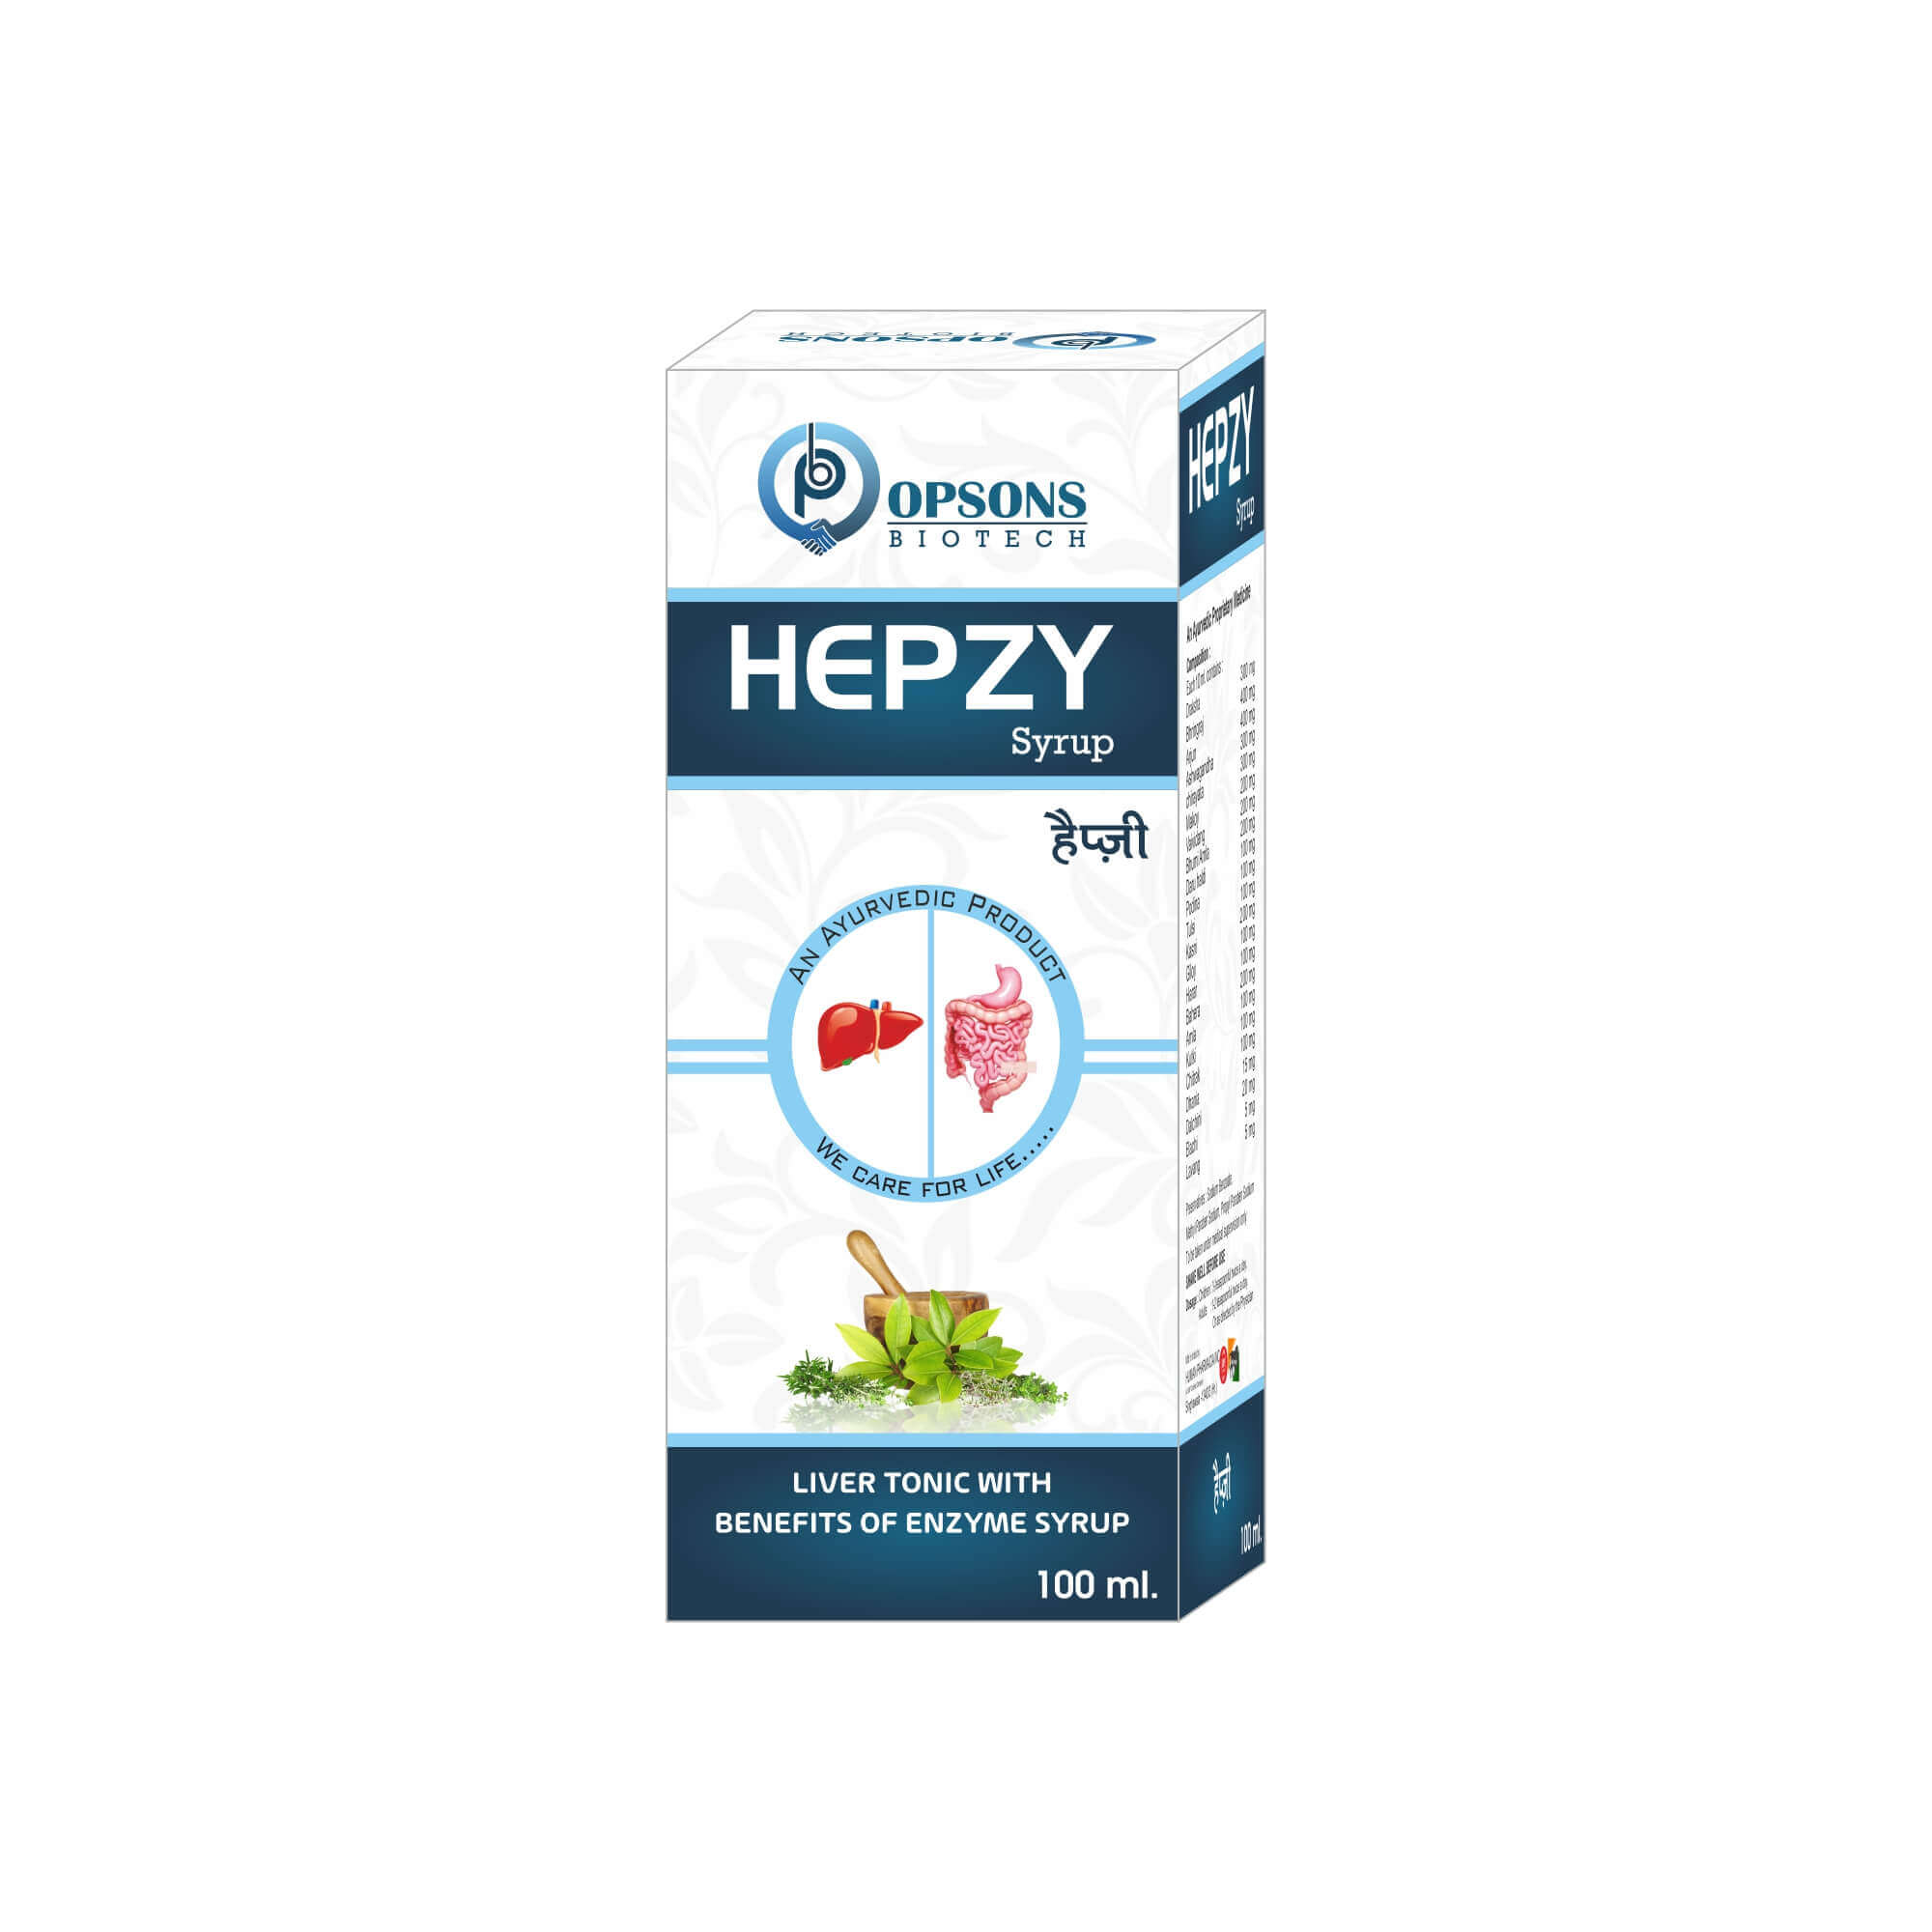 Product Name: Hepzy, Compositions of Liver Tonic with Benefits of Enzyme Syrup are Liver Tonic with Benefits of Enzyme Syrup - Opsons Biotech